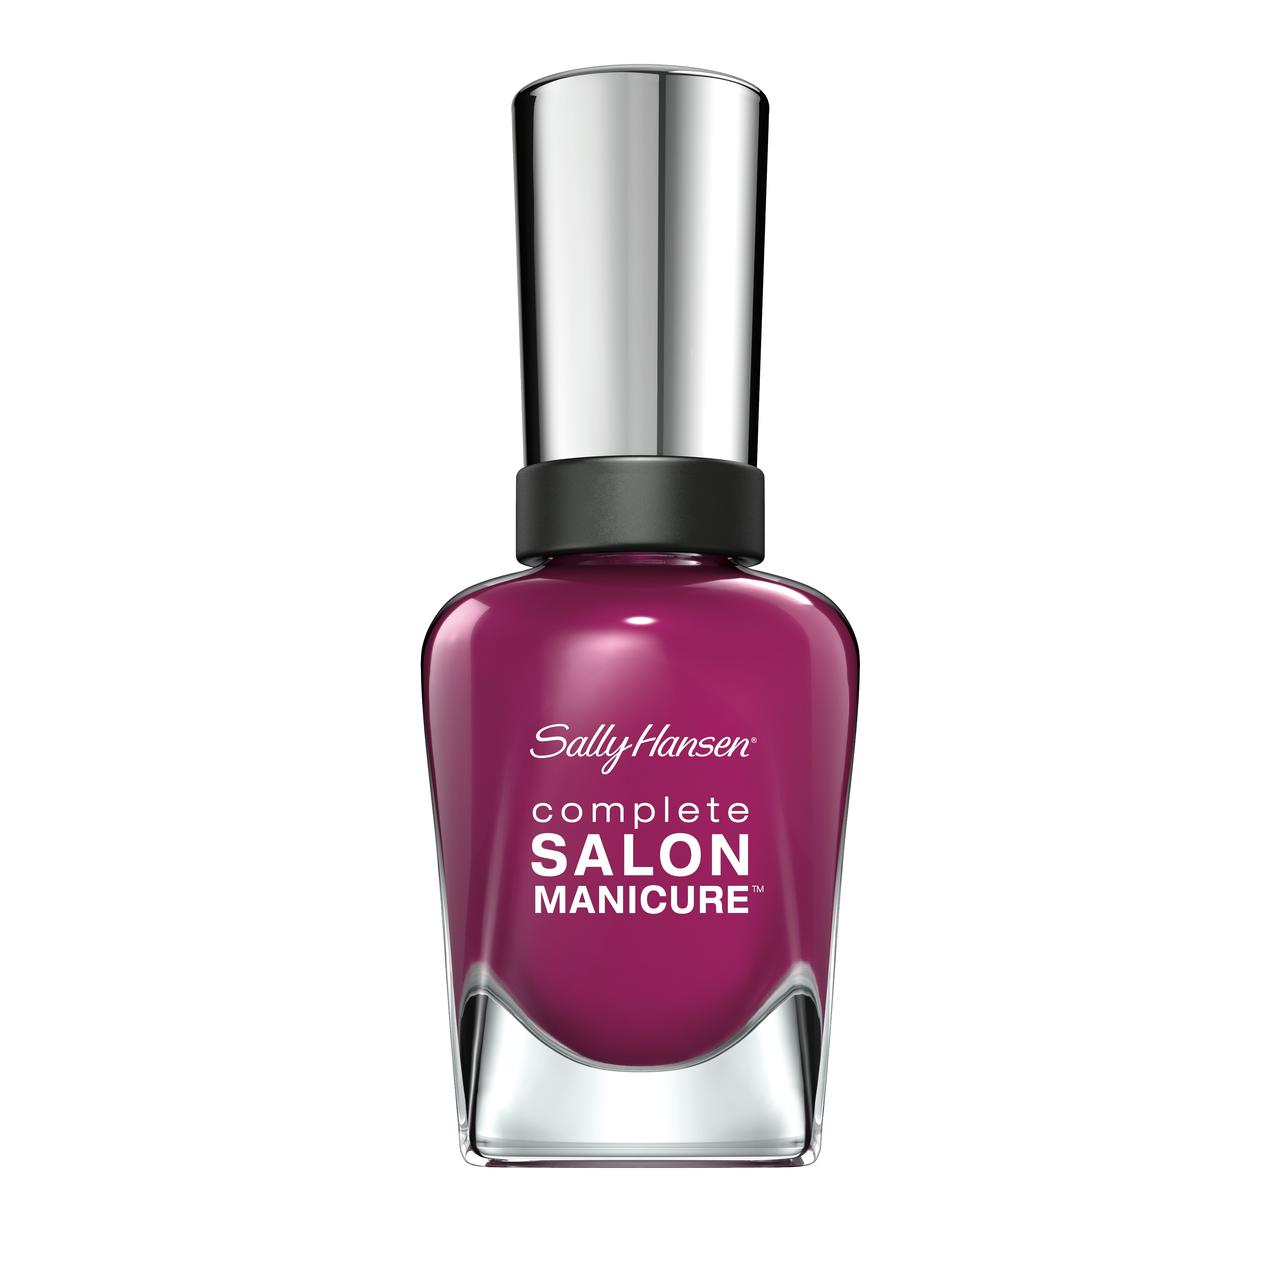 Sally Hansen Complete Salon Manicure Nail Color, Orchid Me Not - image 1 of 3